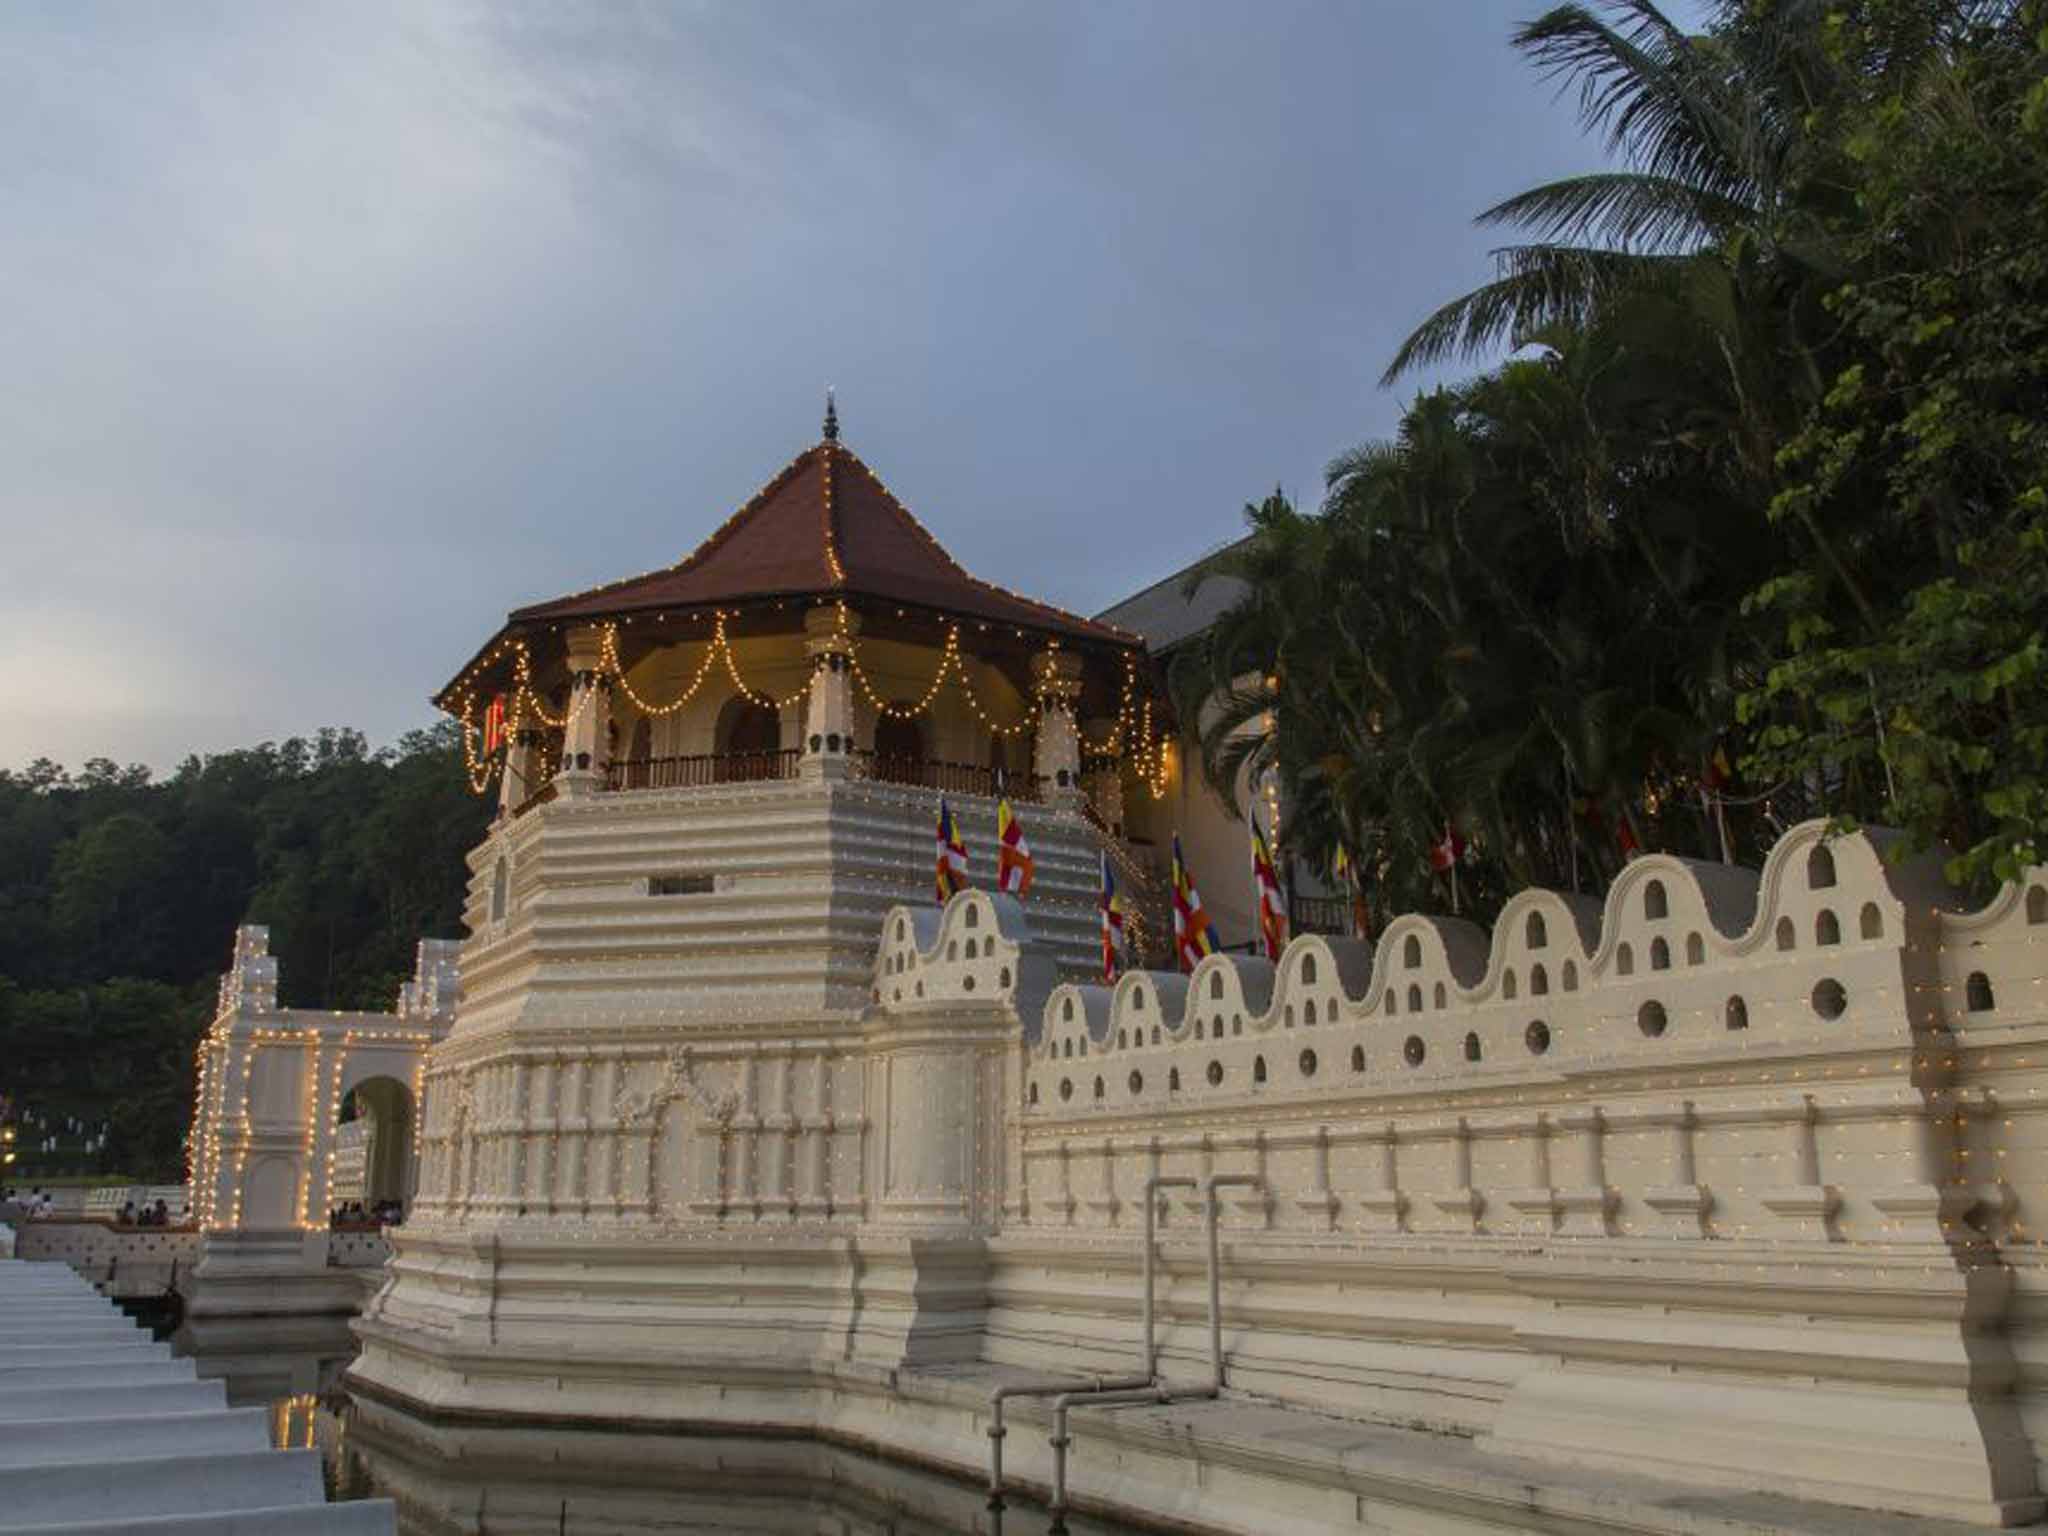 The Sacred Temple of the Tooth Relic, Kandy